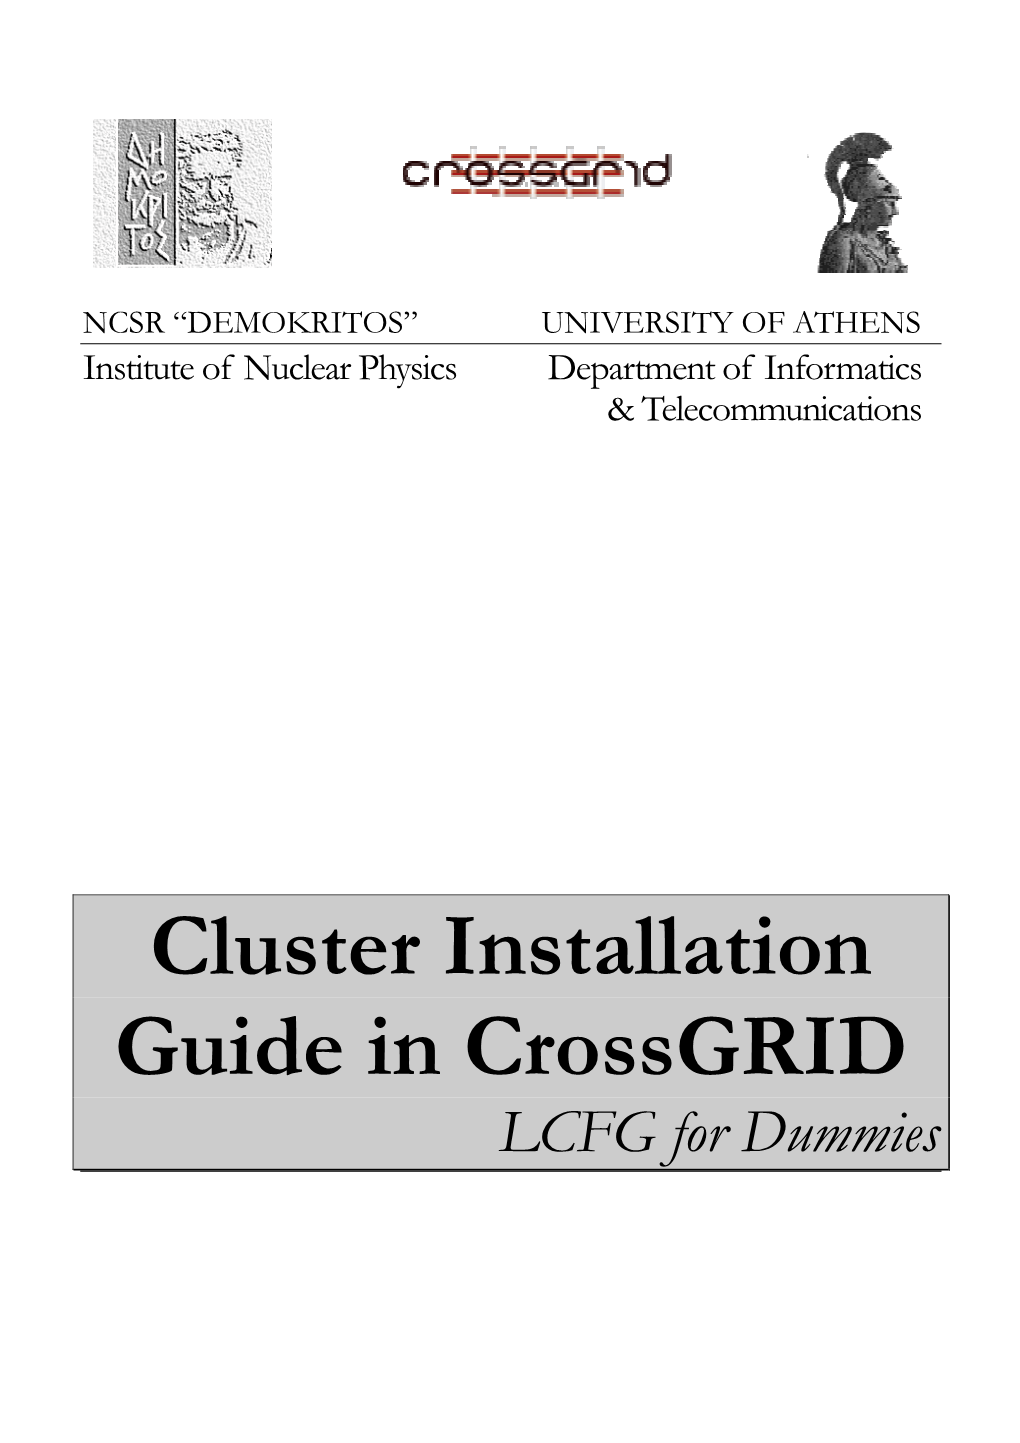 Cluster Installation Guide in Crossgrid LCFG for Dummies